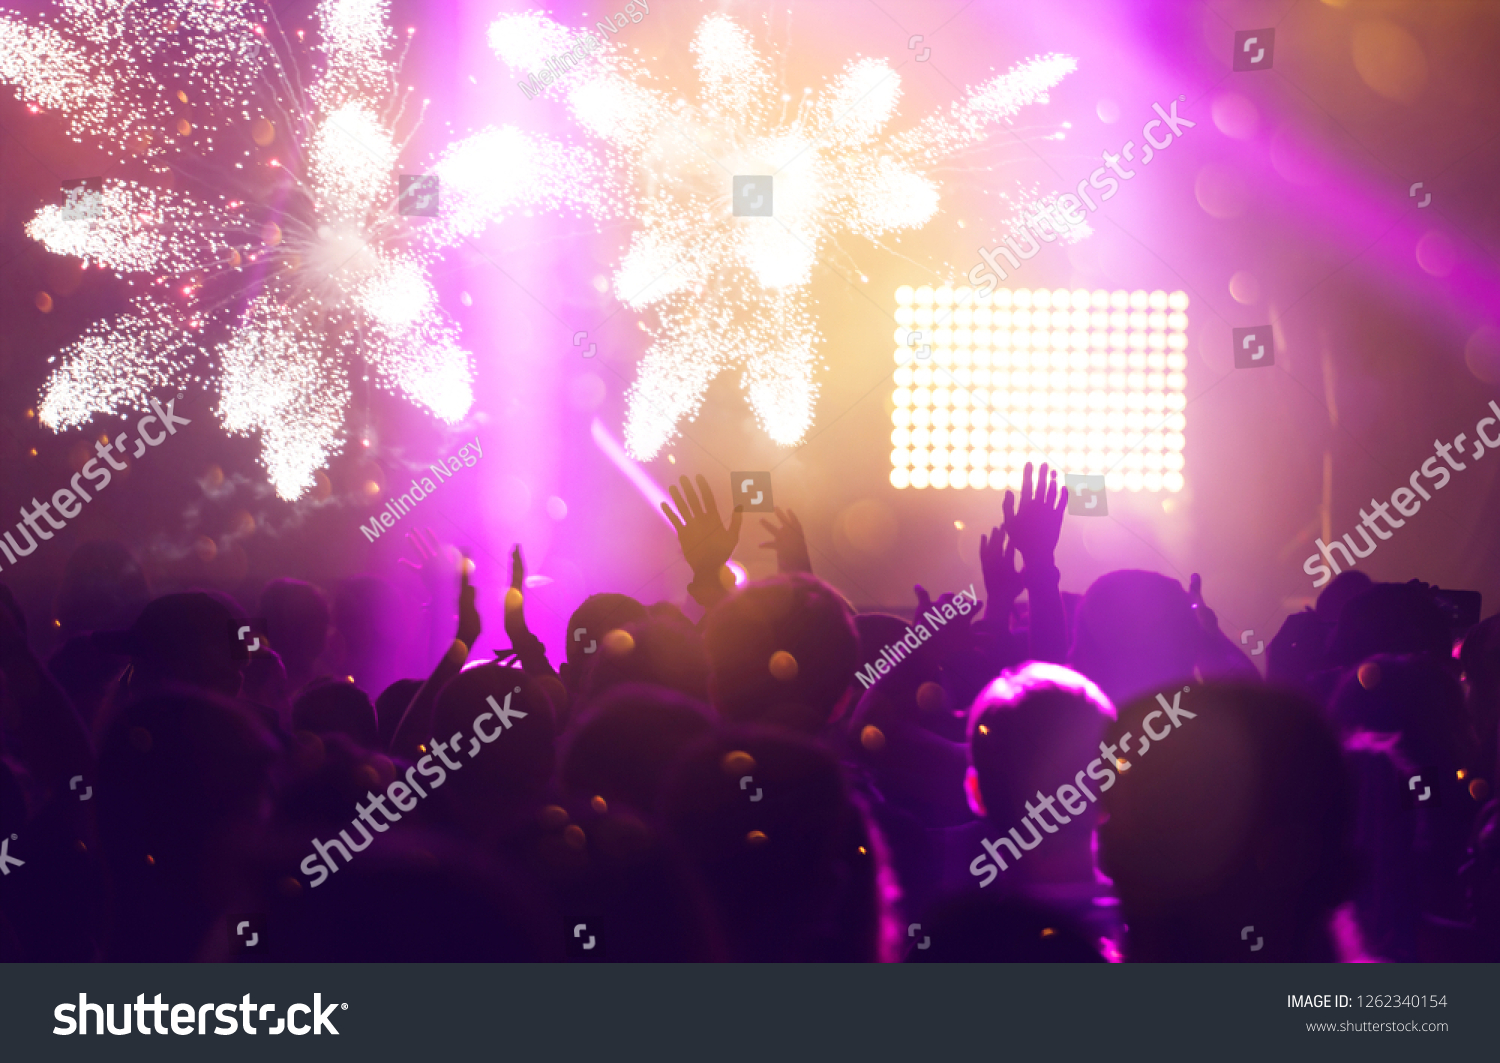 New Year concept - fireworks and cheering crowd celebrating the New Year #1262340154